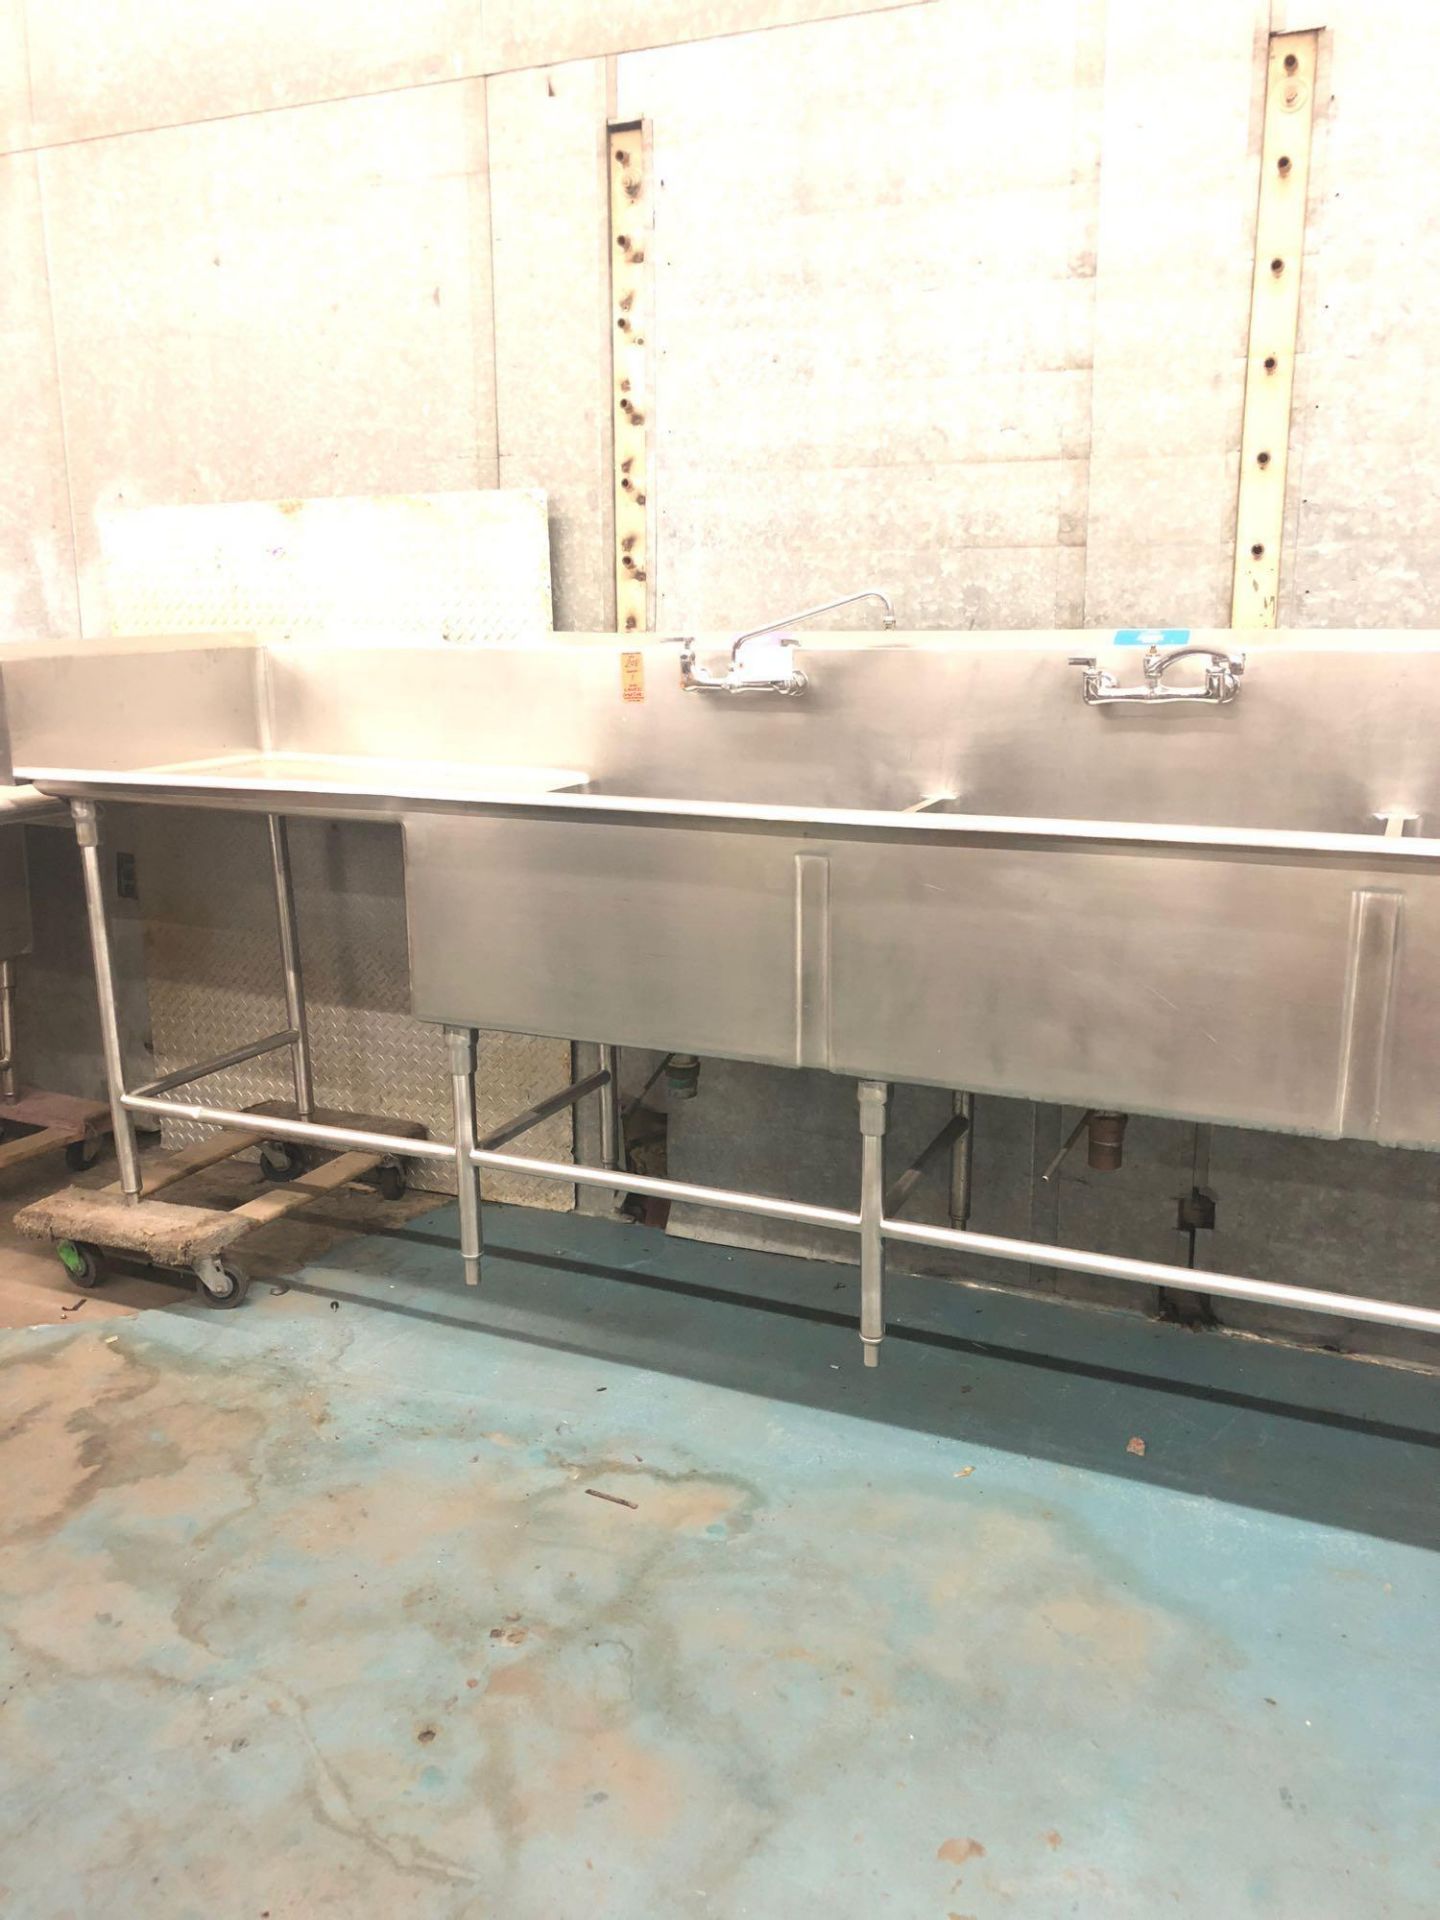 162 inch three compartment sink - Image 3 of 4